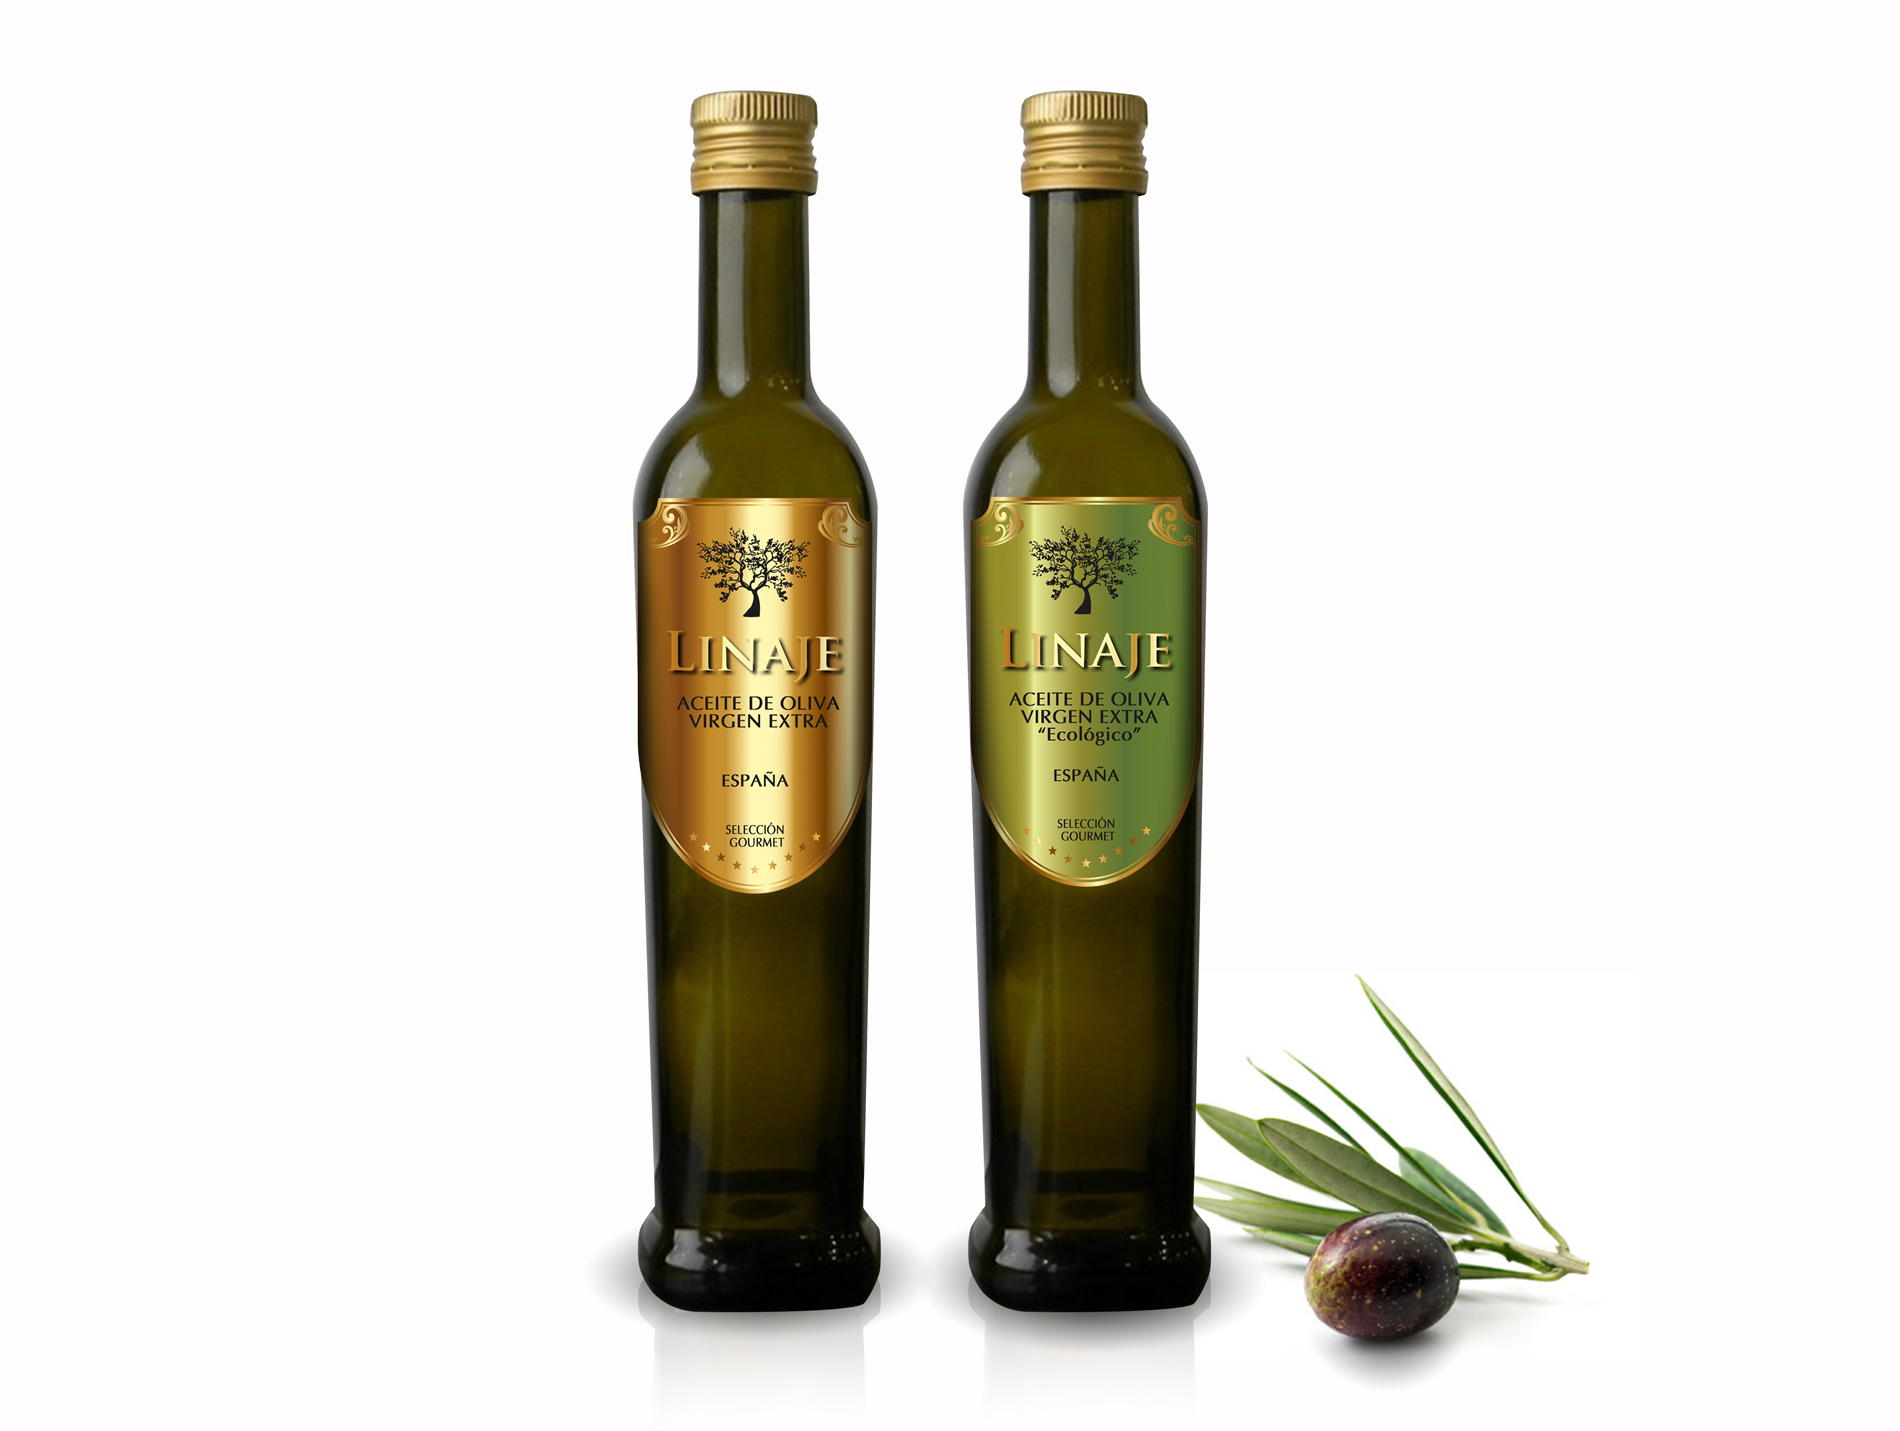 Portfolio of graphic and creative design works of extra virgin olive oil label design and lineage packaging